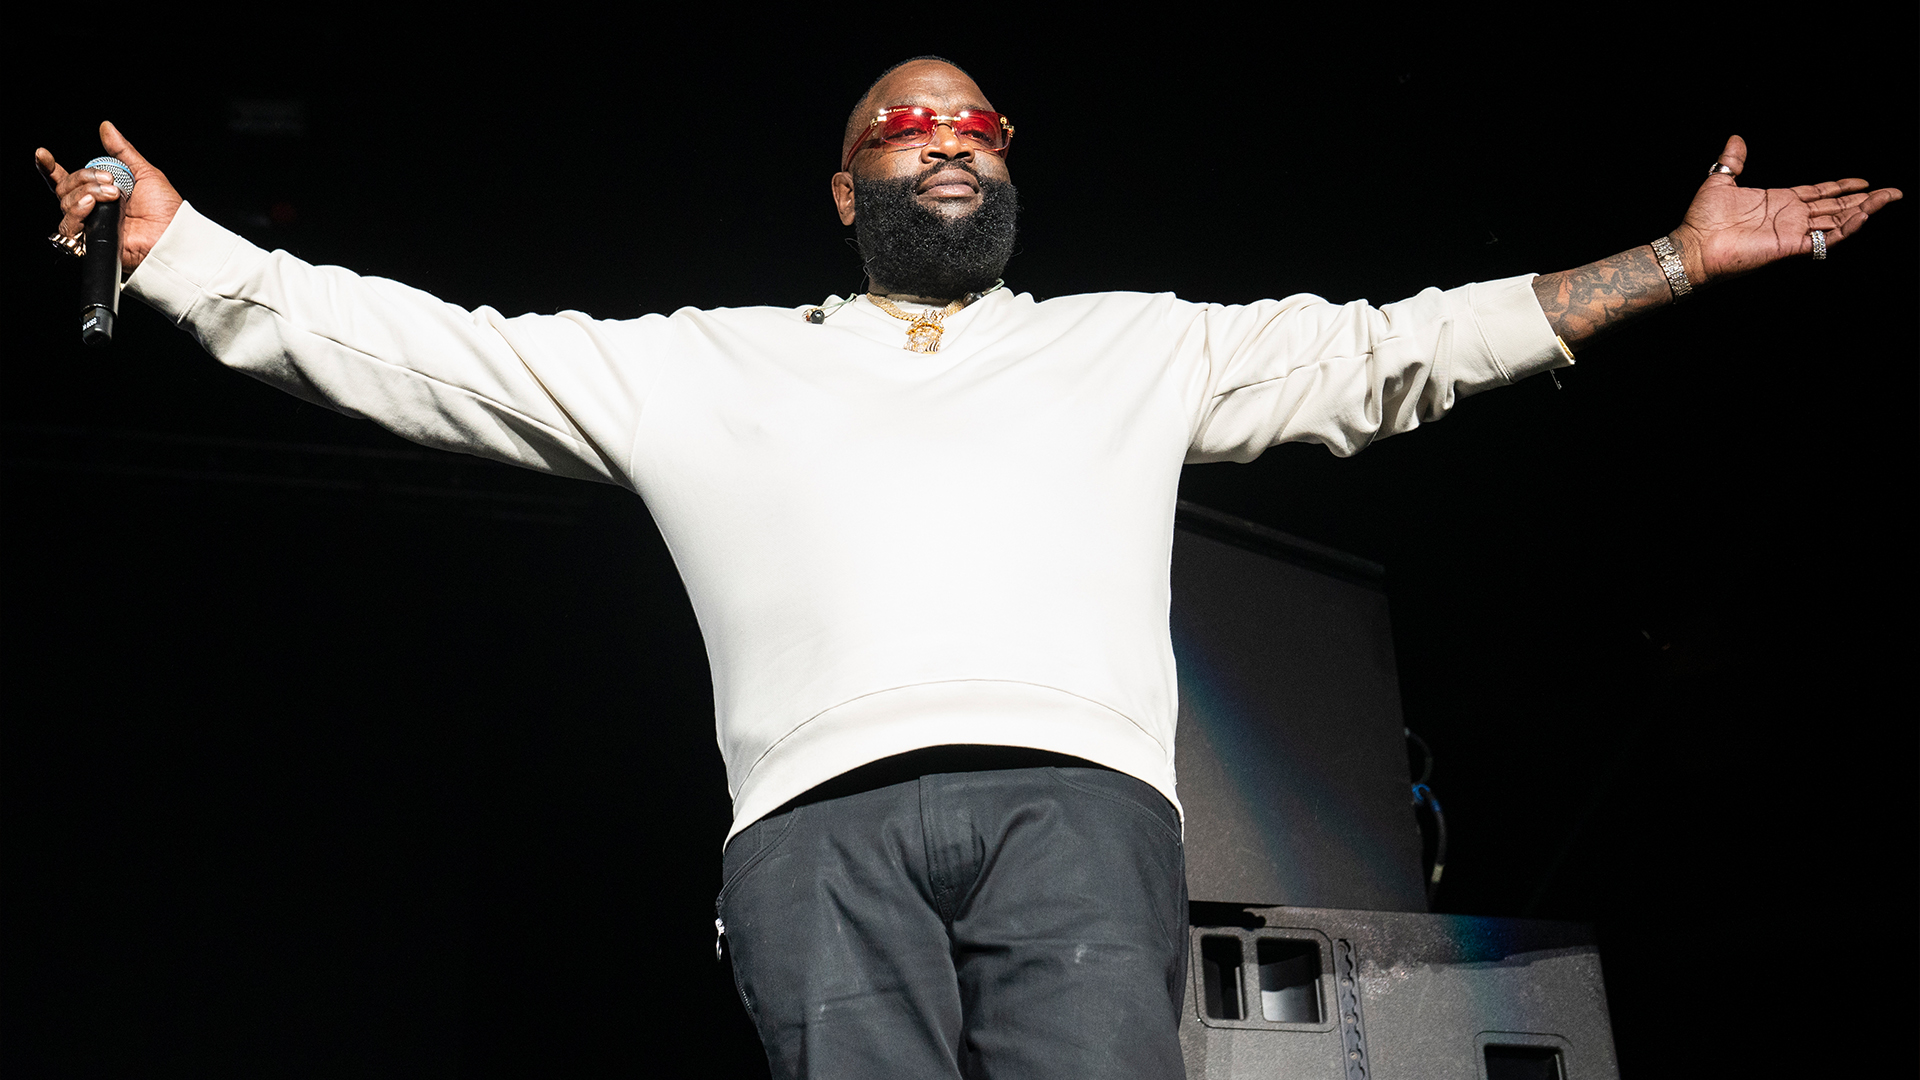 Rick Ross Says 'When You're Running A Business, There Will Be Mistakes' In Response To Wingstop U.S. Labor Department Allegations